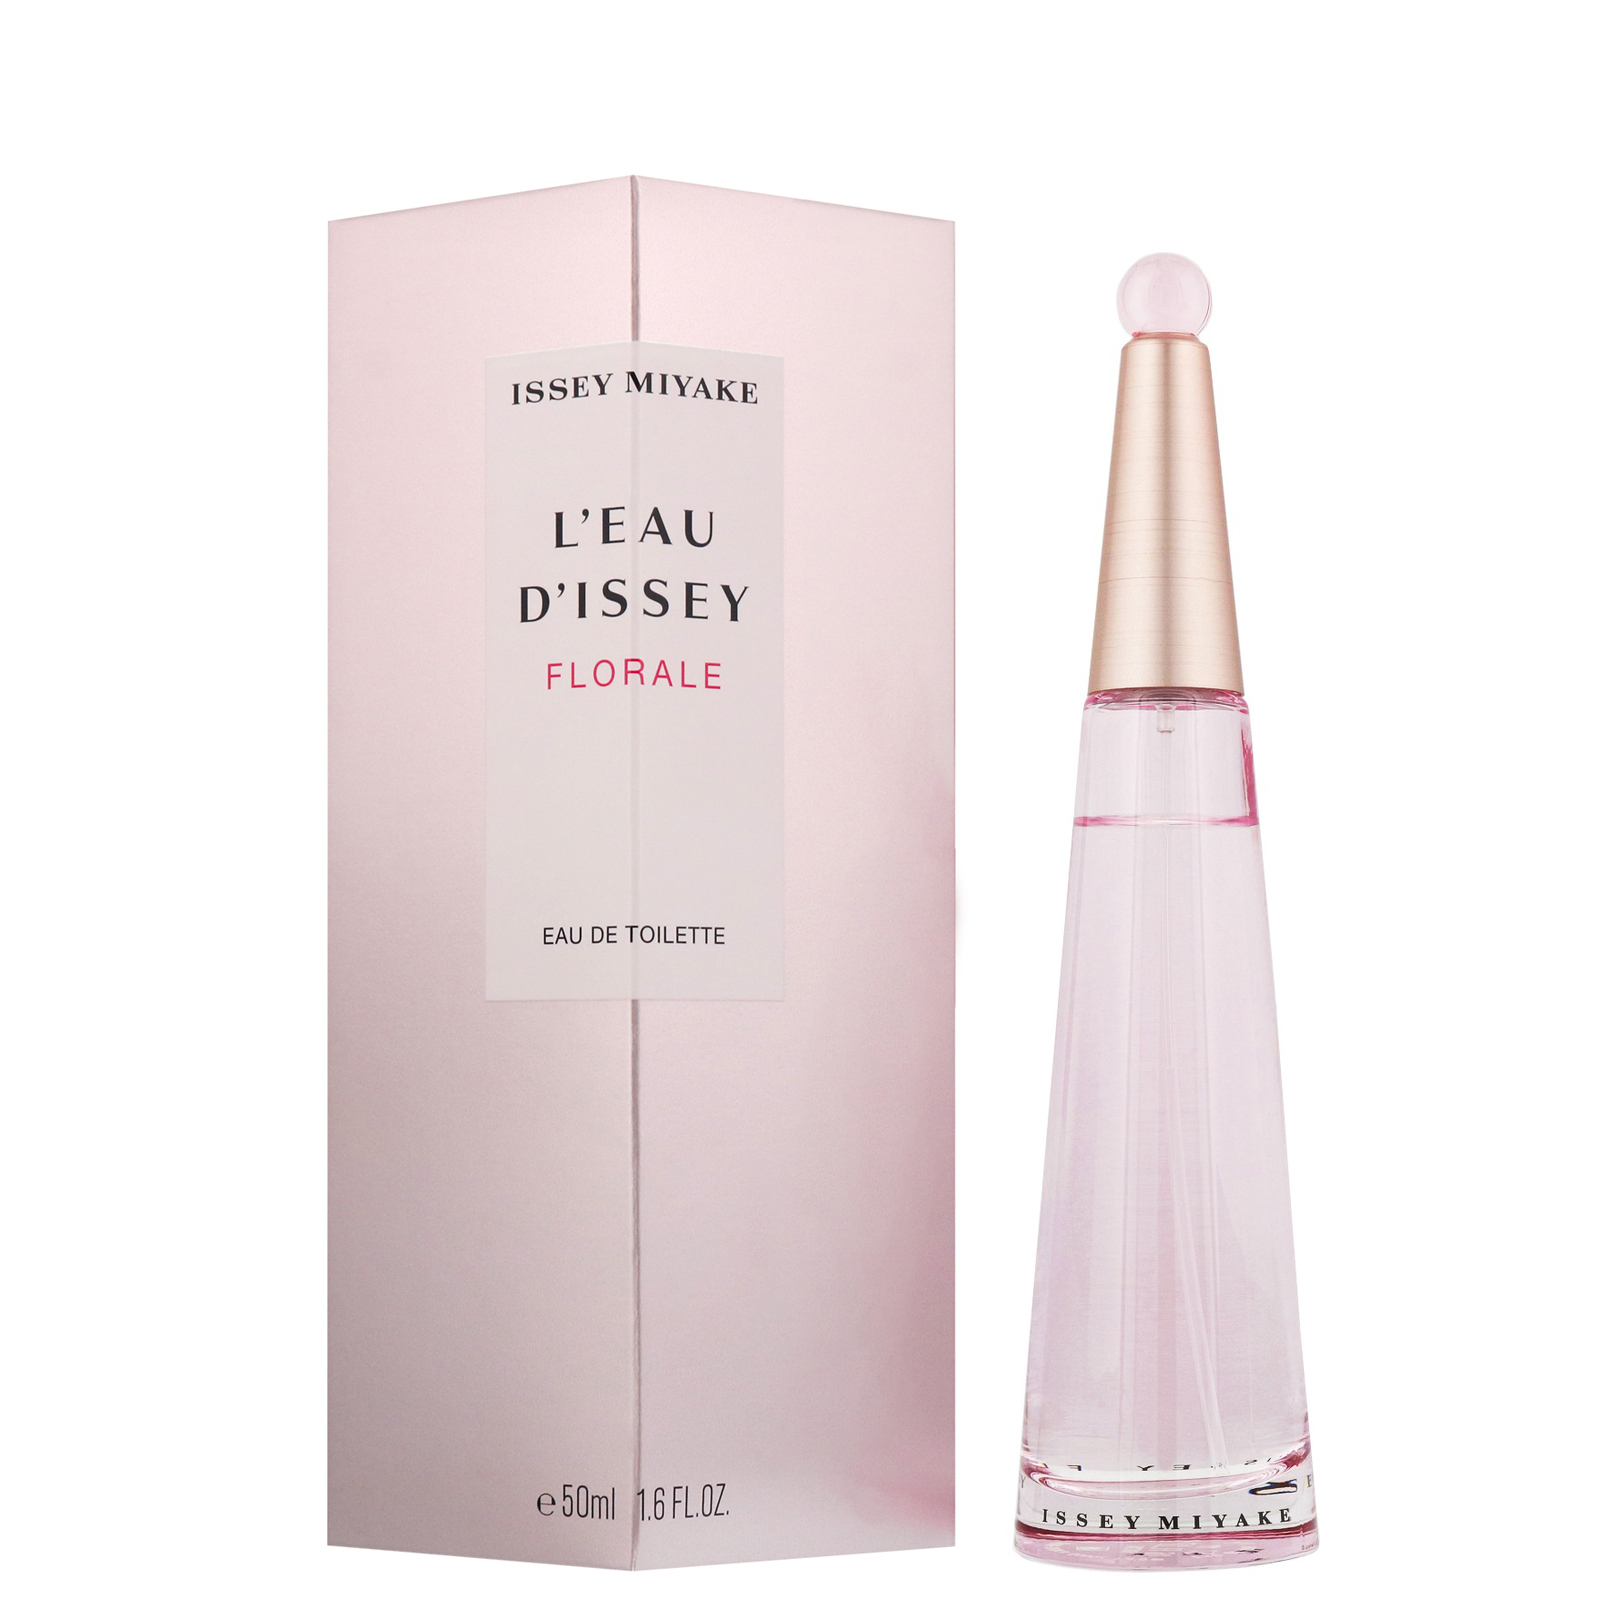 L'Eau D'Issey Florale by Issey Miyake